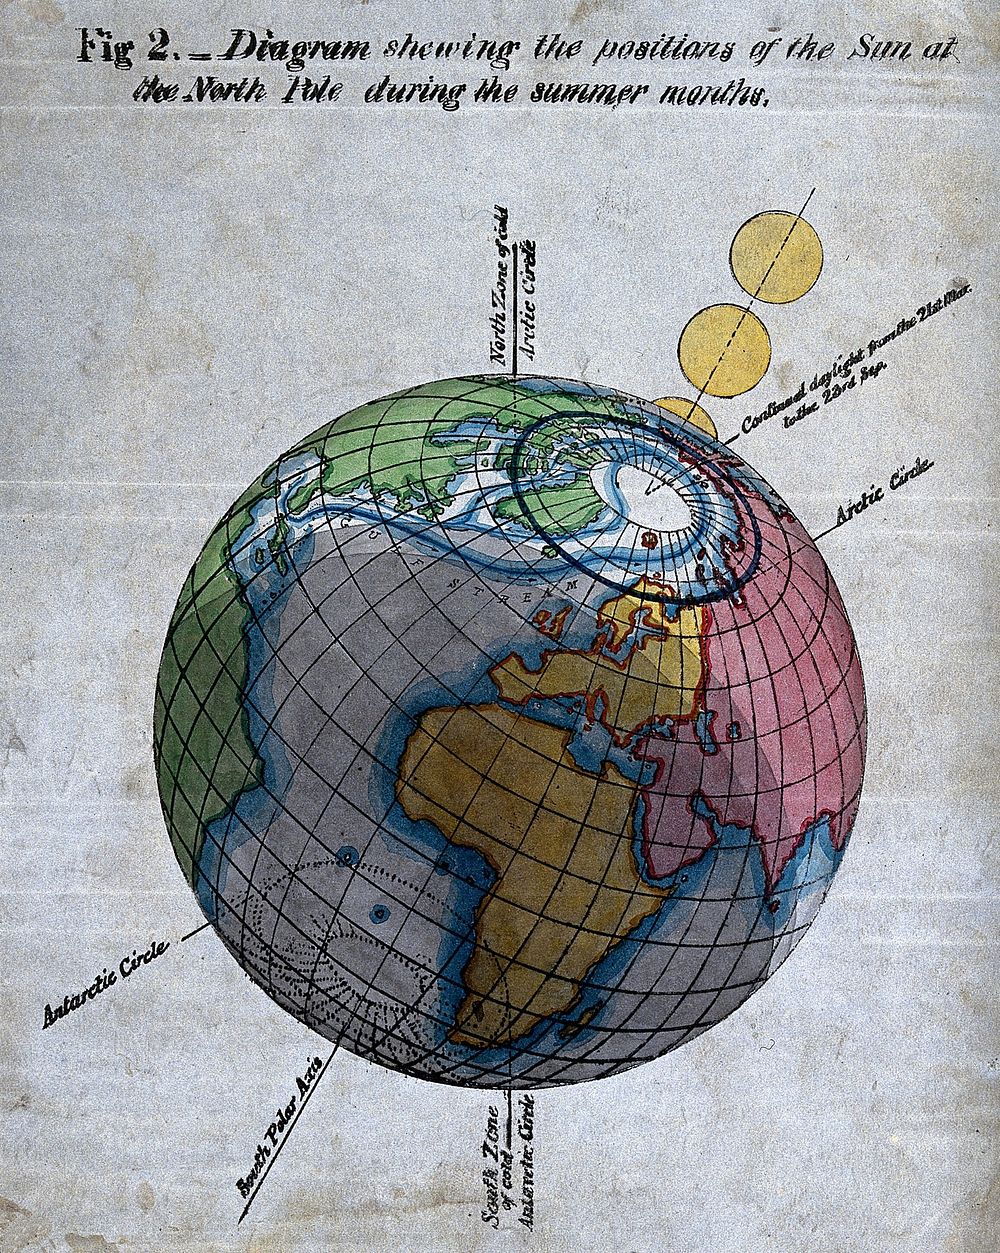 Meteorology: a view of the Earth and the sun during summer [in the Northern hemisphere]. Coloured lithograph.